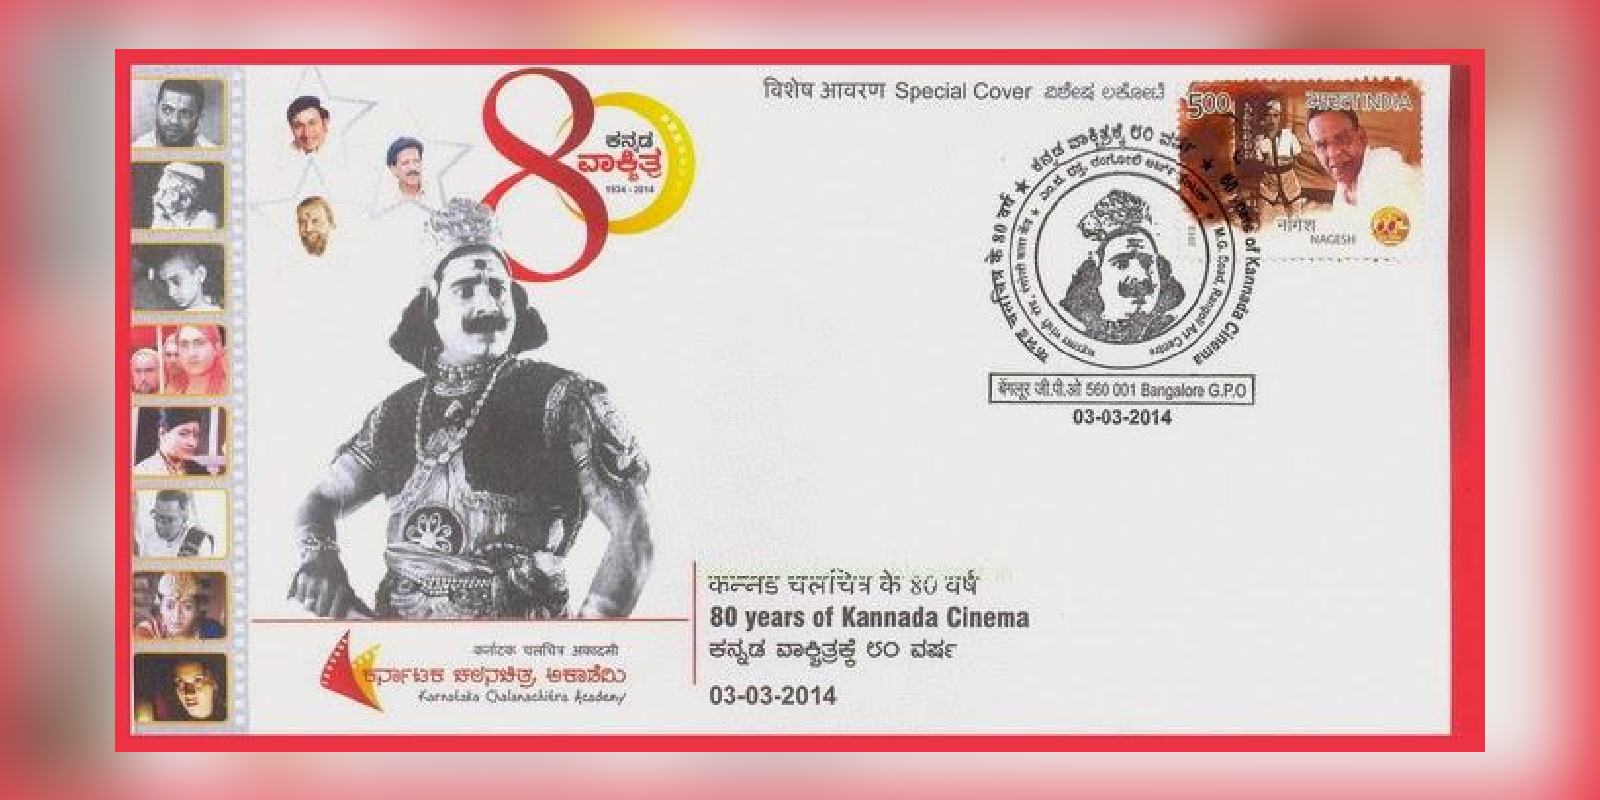 Special cover celebrating 80 years of Kannada Cinema and 'Sati Sulochana', the first Kannada talkie film made on Lord Rama and Ramayana